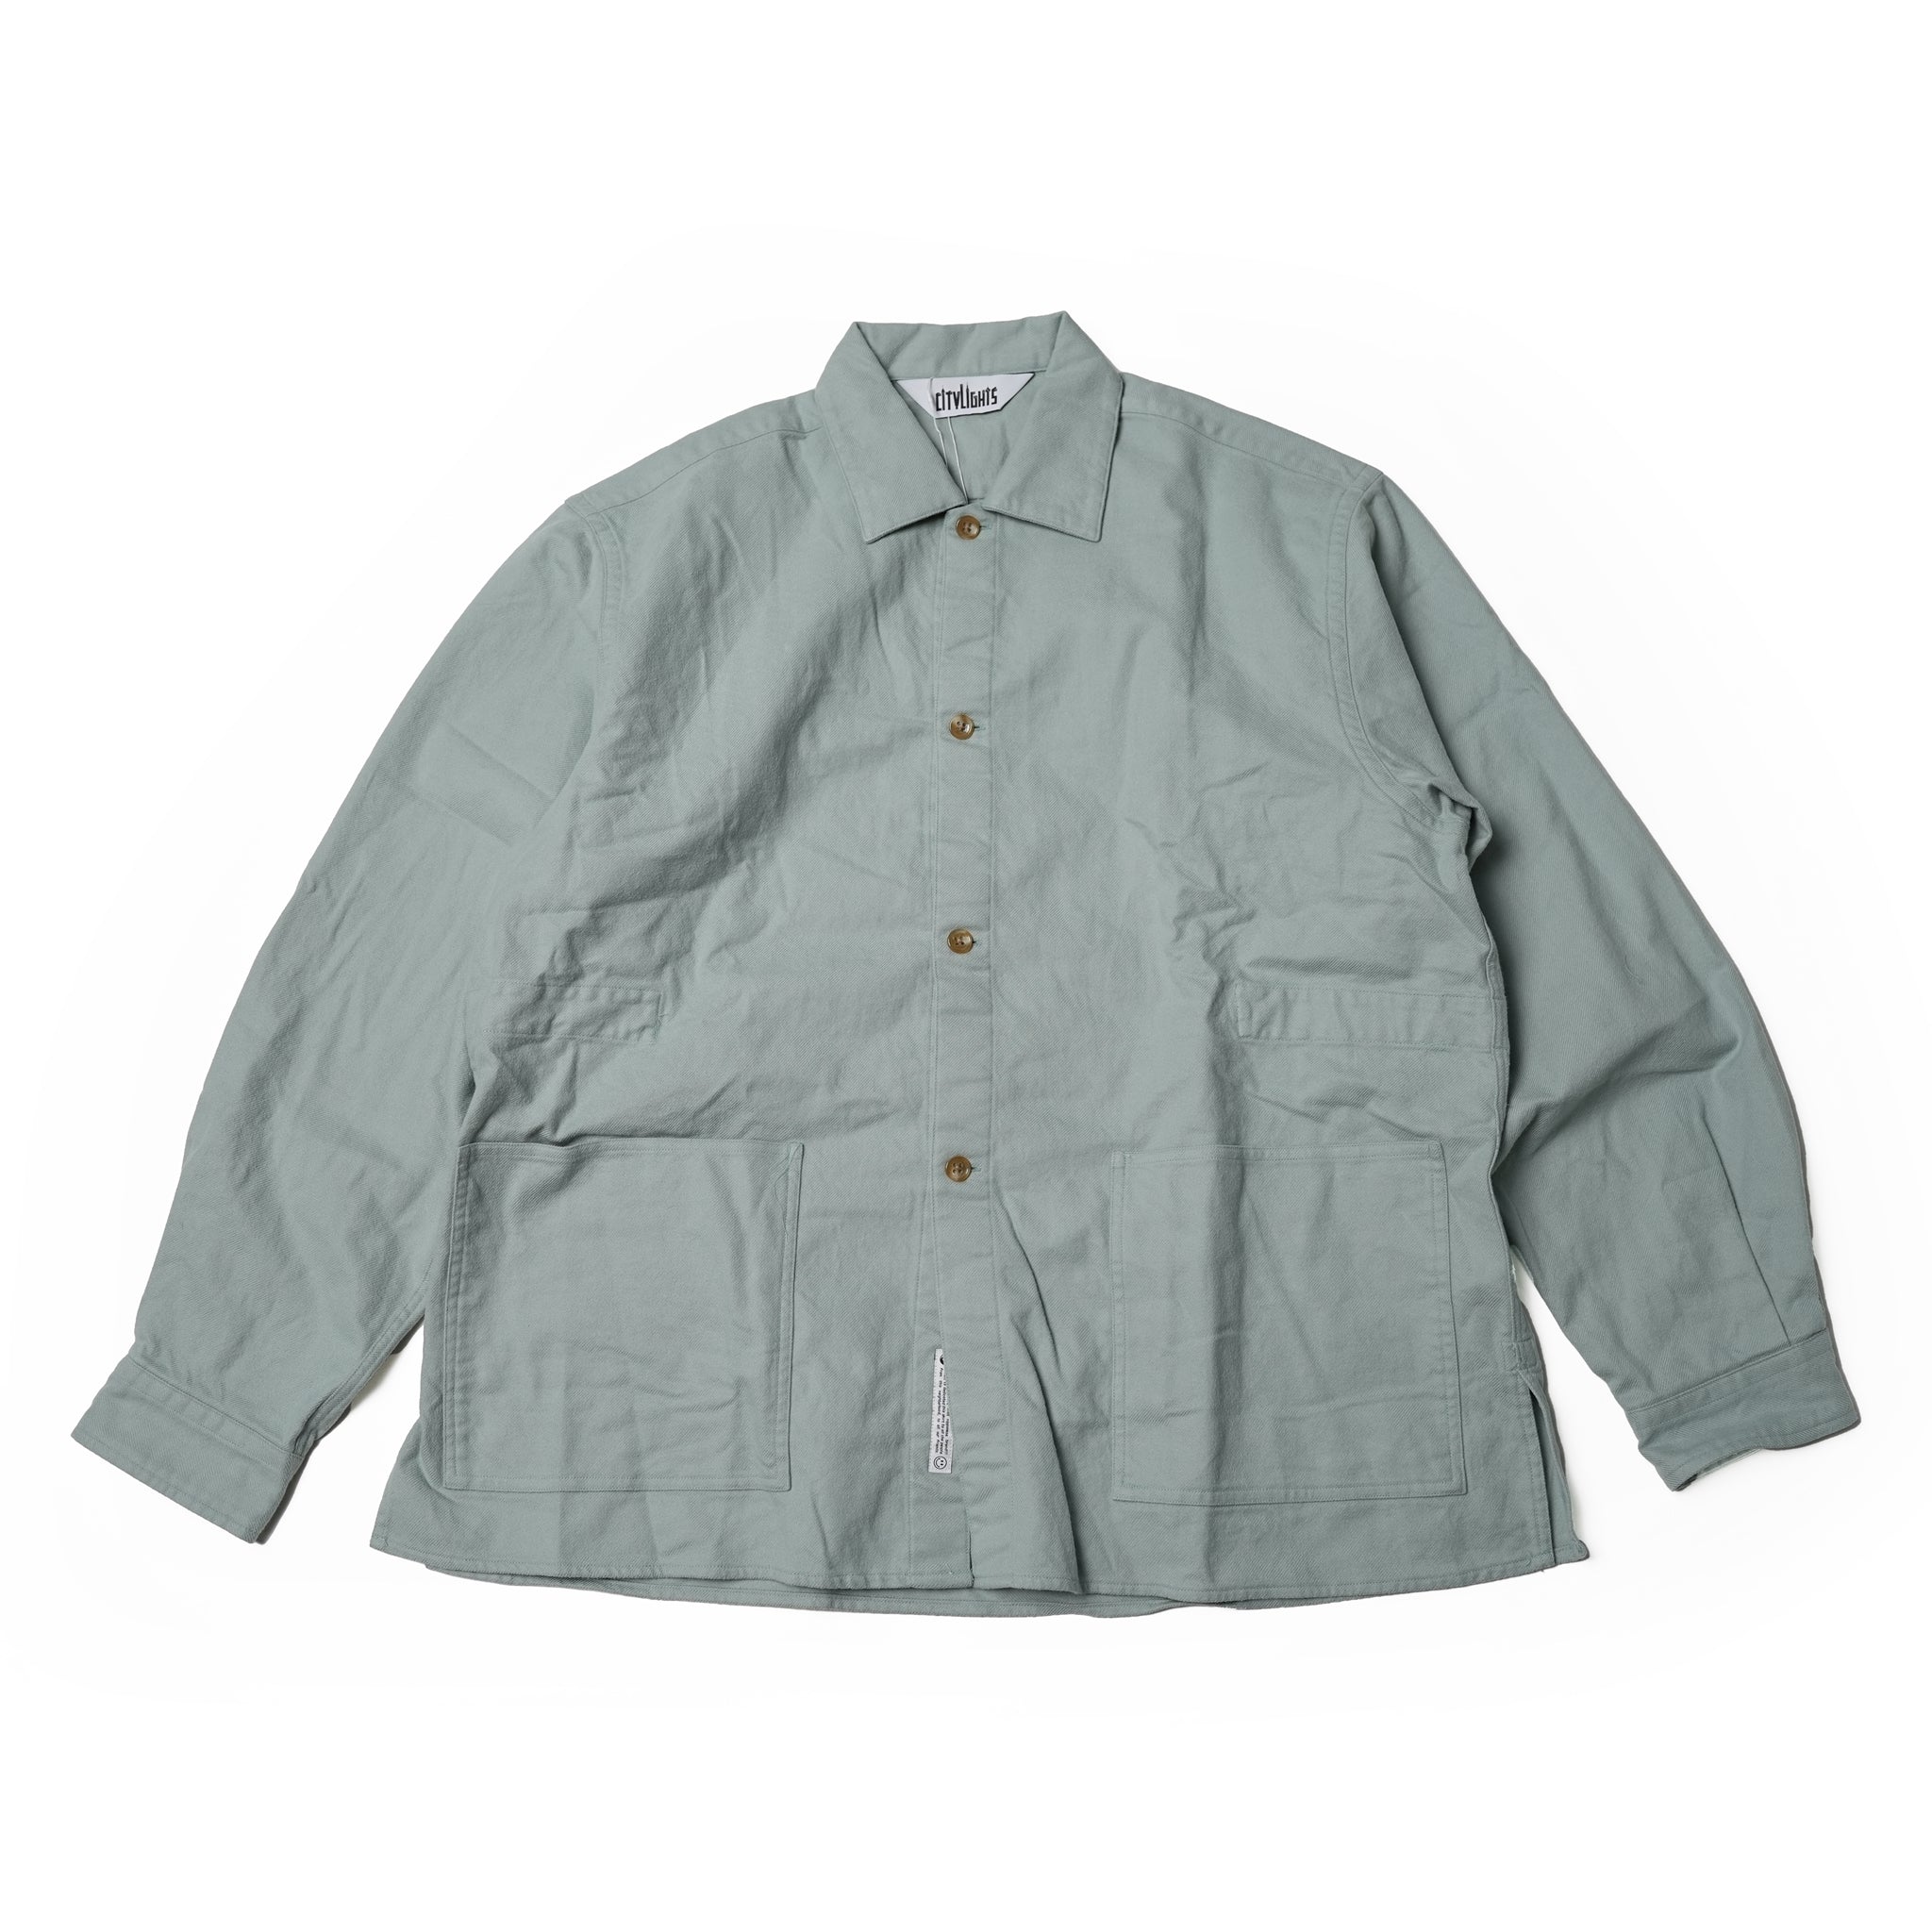 Name: E-Z GOING SHIRTS | Color:Pistachio | Size:Regular/Tall 【CITYLIGHTS PRODUCTS_シティライツプロダクツ】